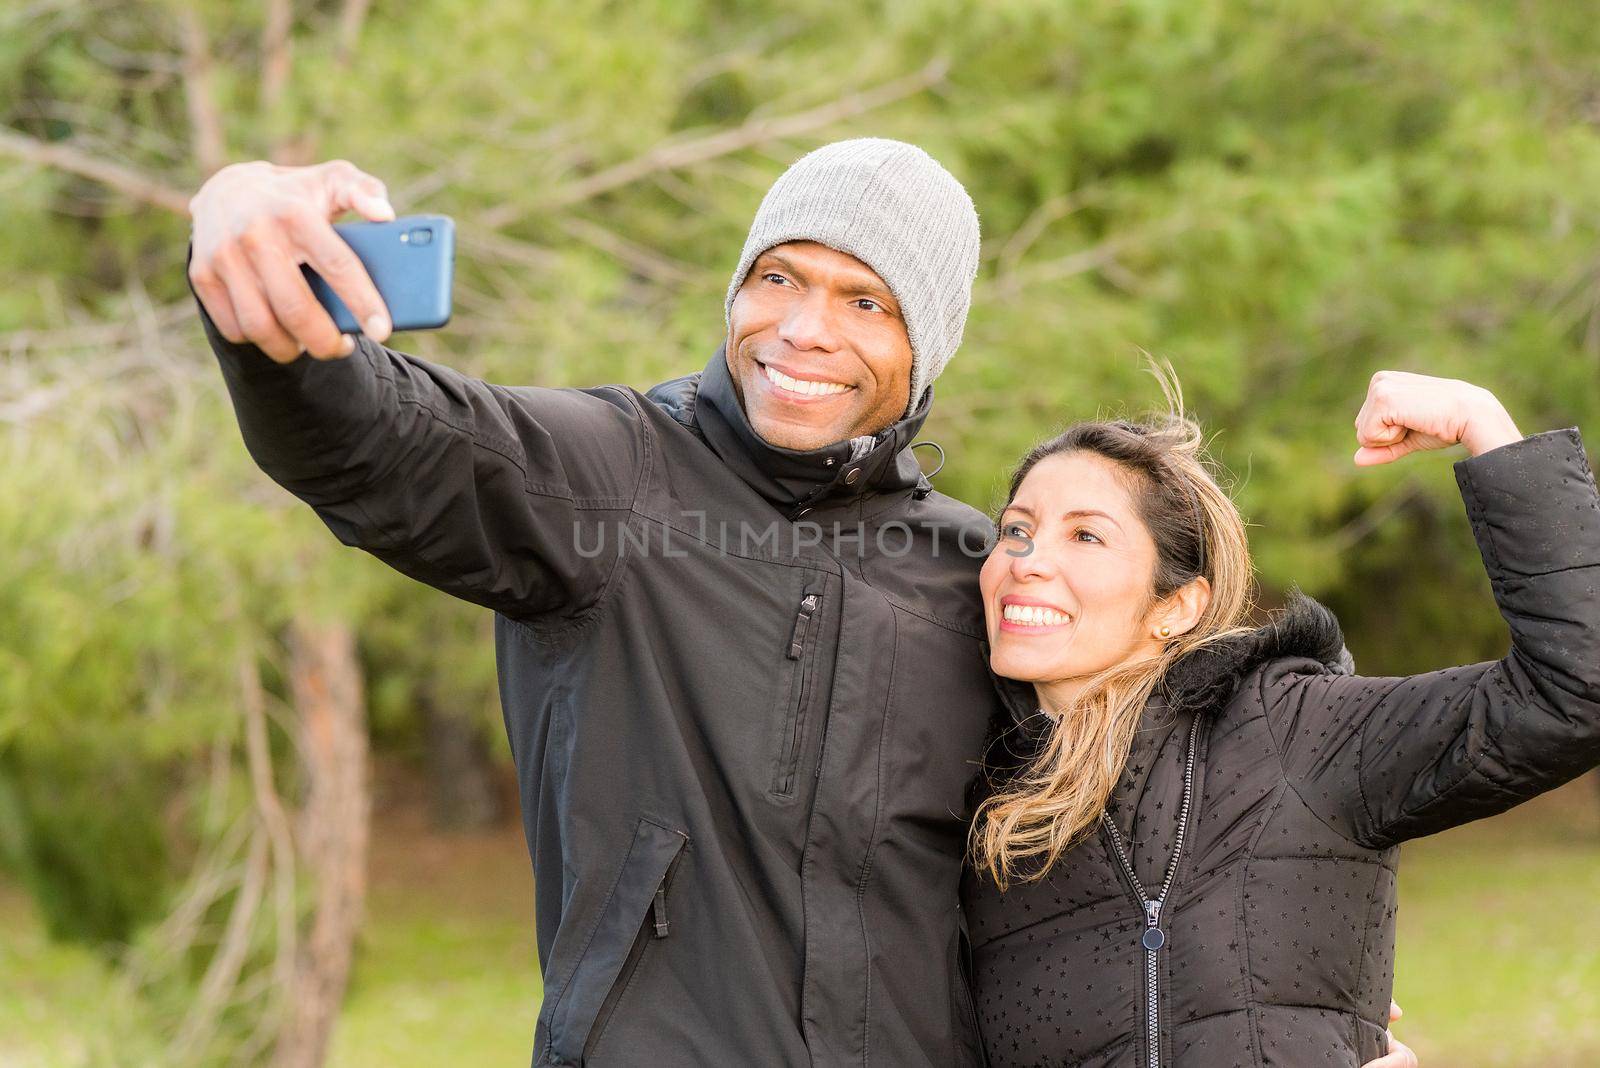 Sportswoman doing gesture flex with one arm while her sporty boyfriend takes a selfie. Multi-ethnic couple outdoors.